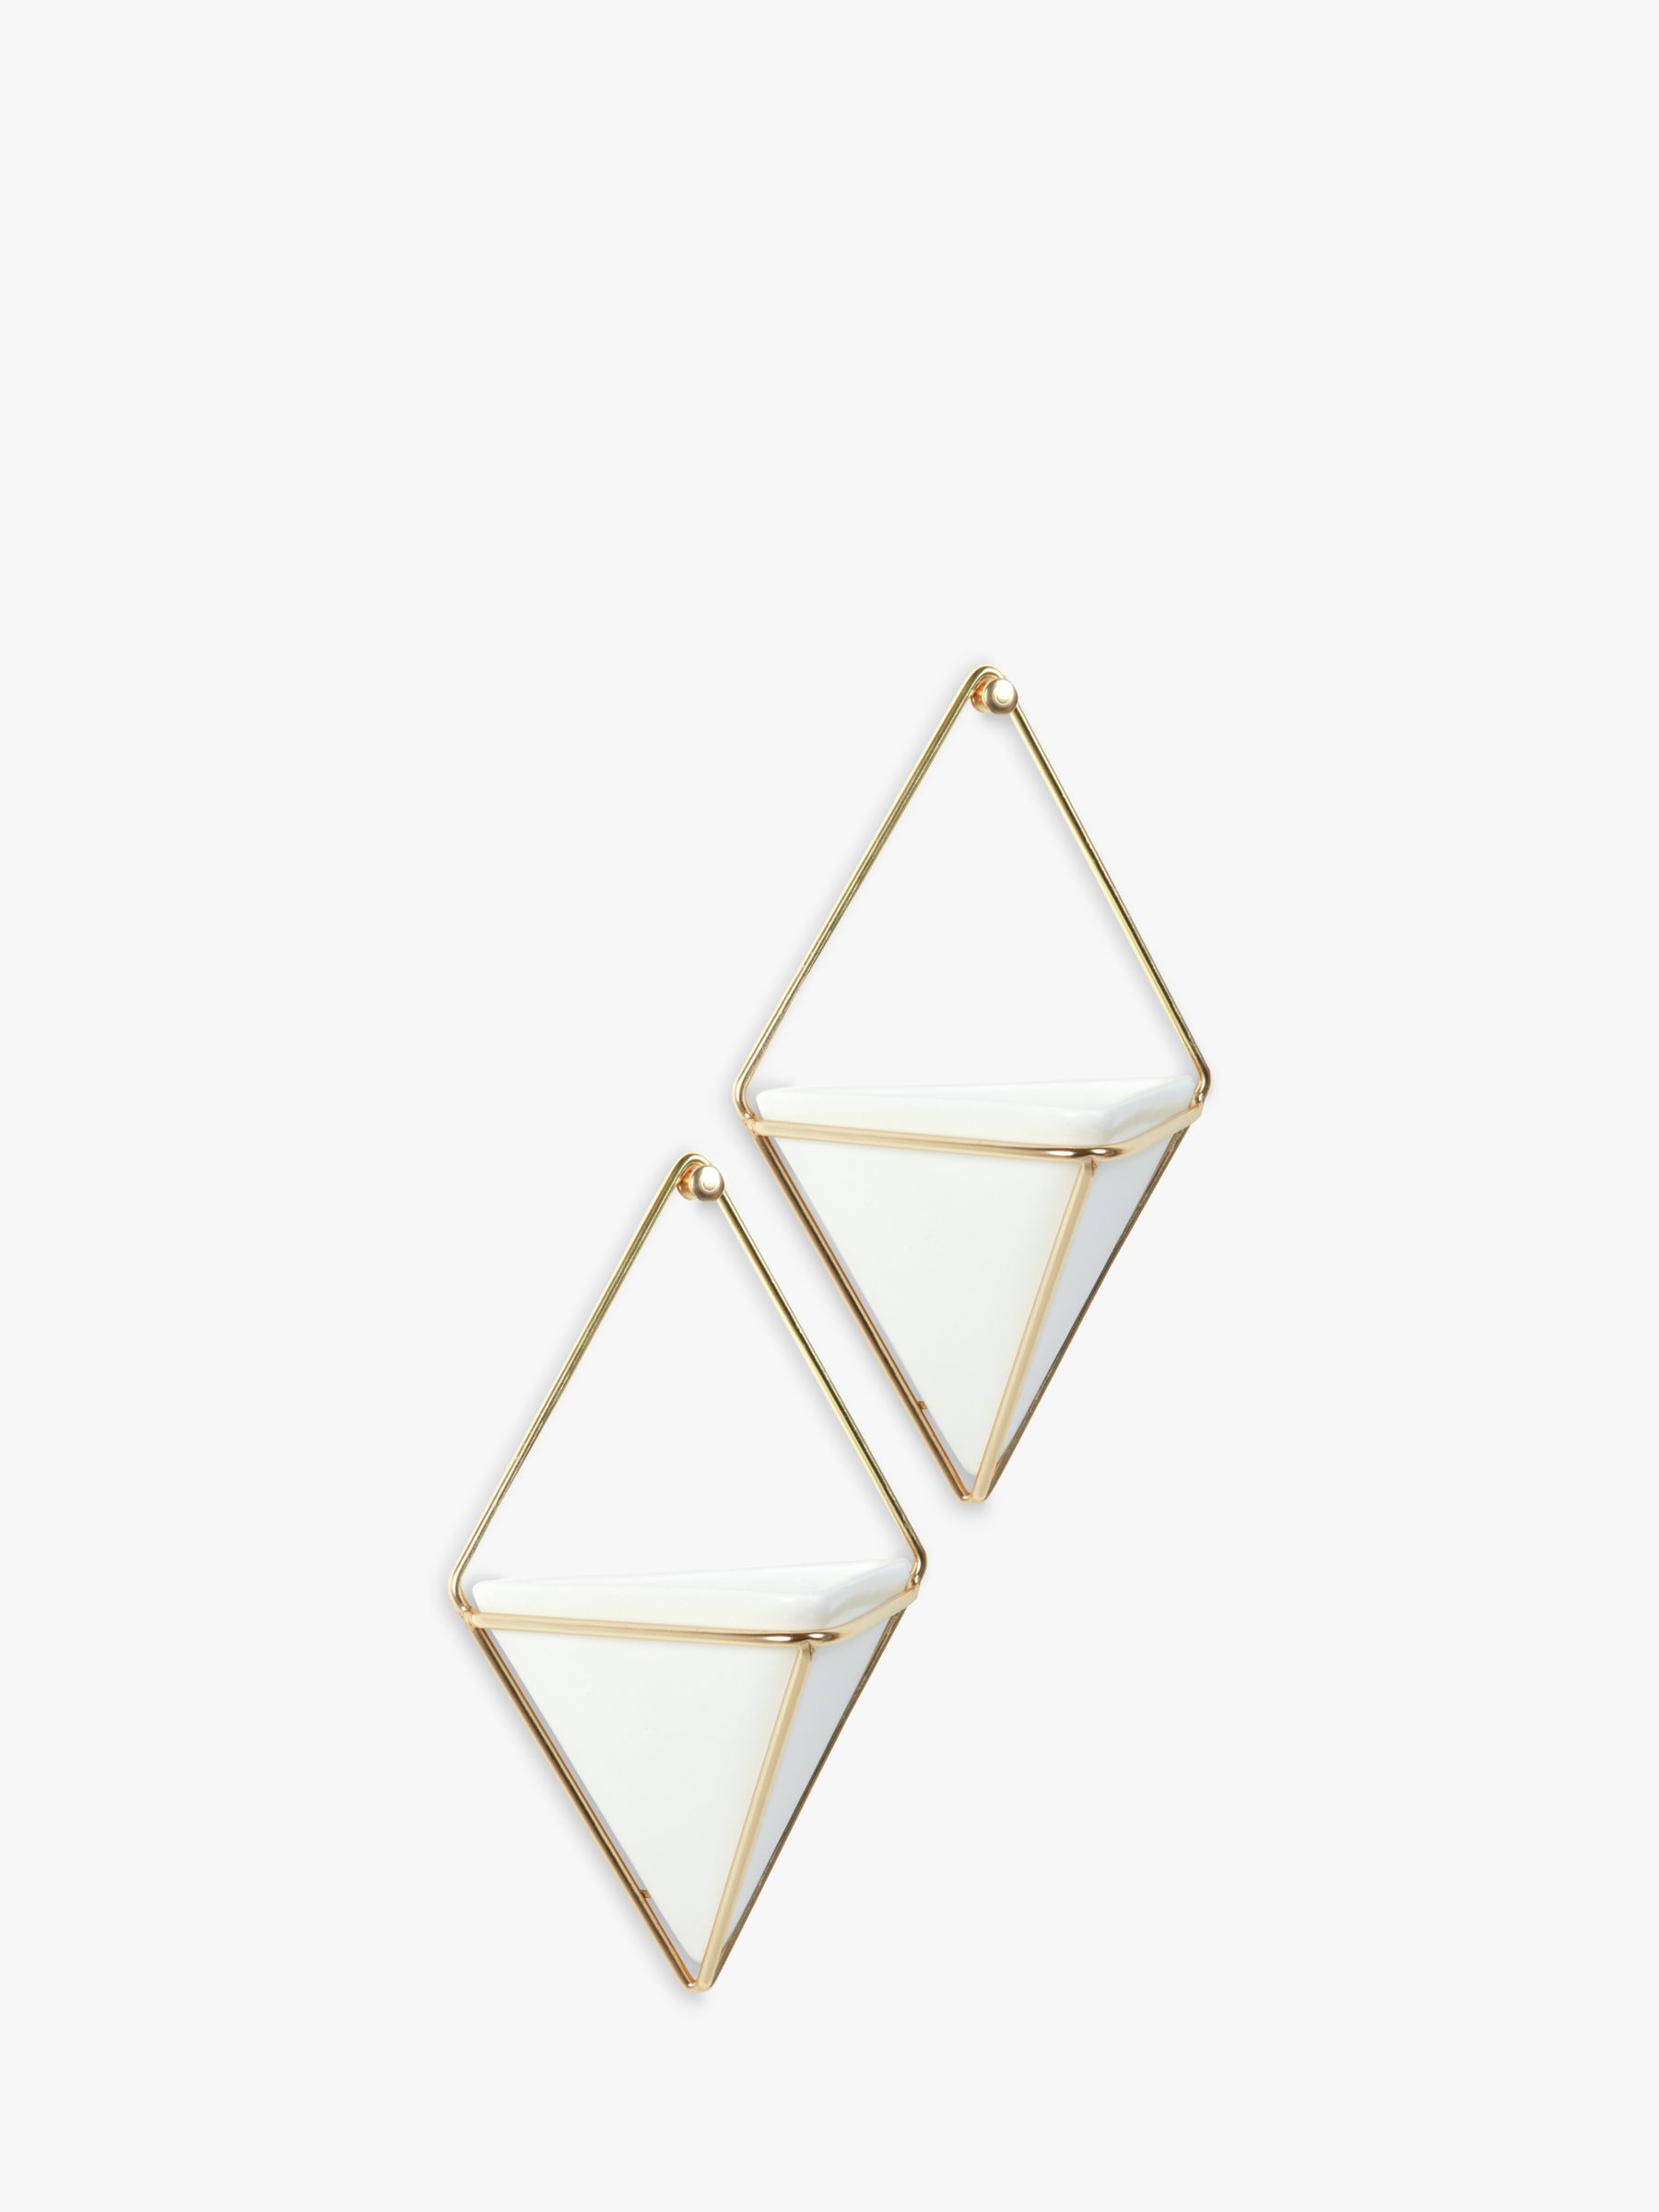 Buy Umbra Trigg Small Wall Planters, White, Set of 2 Online at johnlewis.com